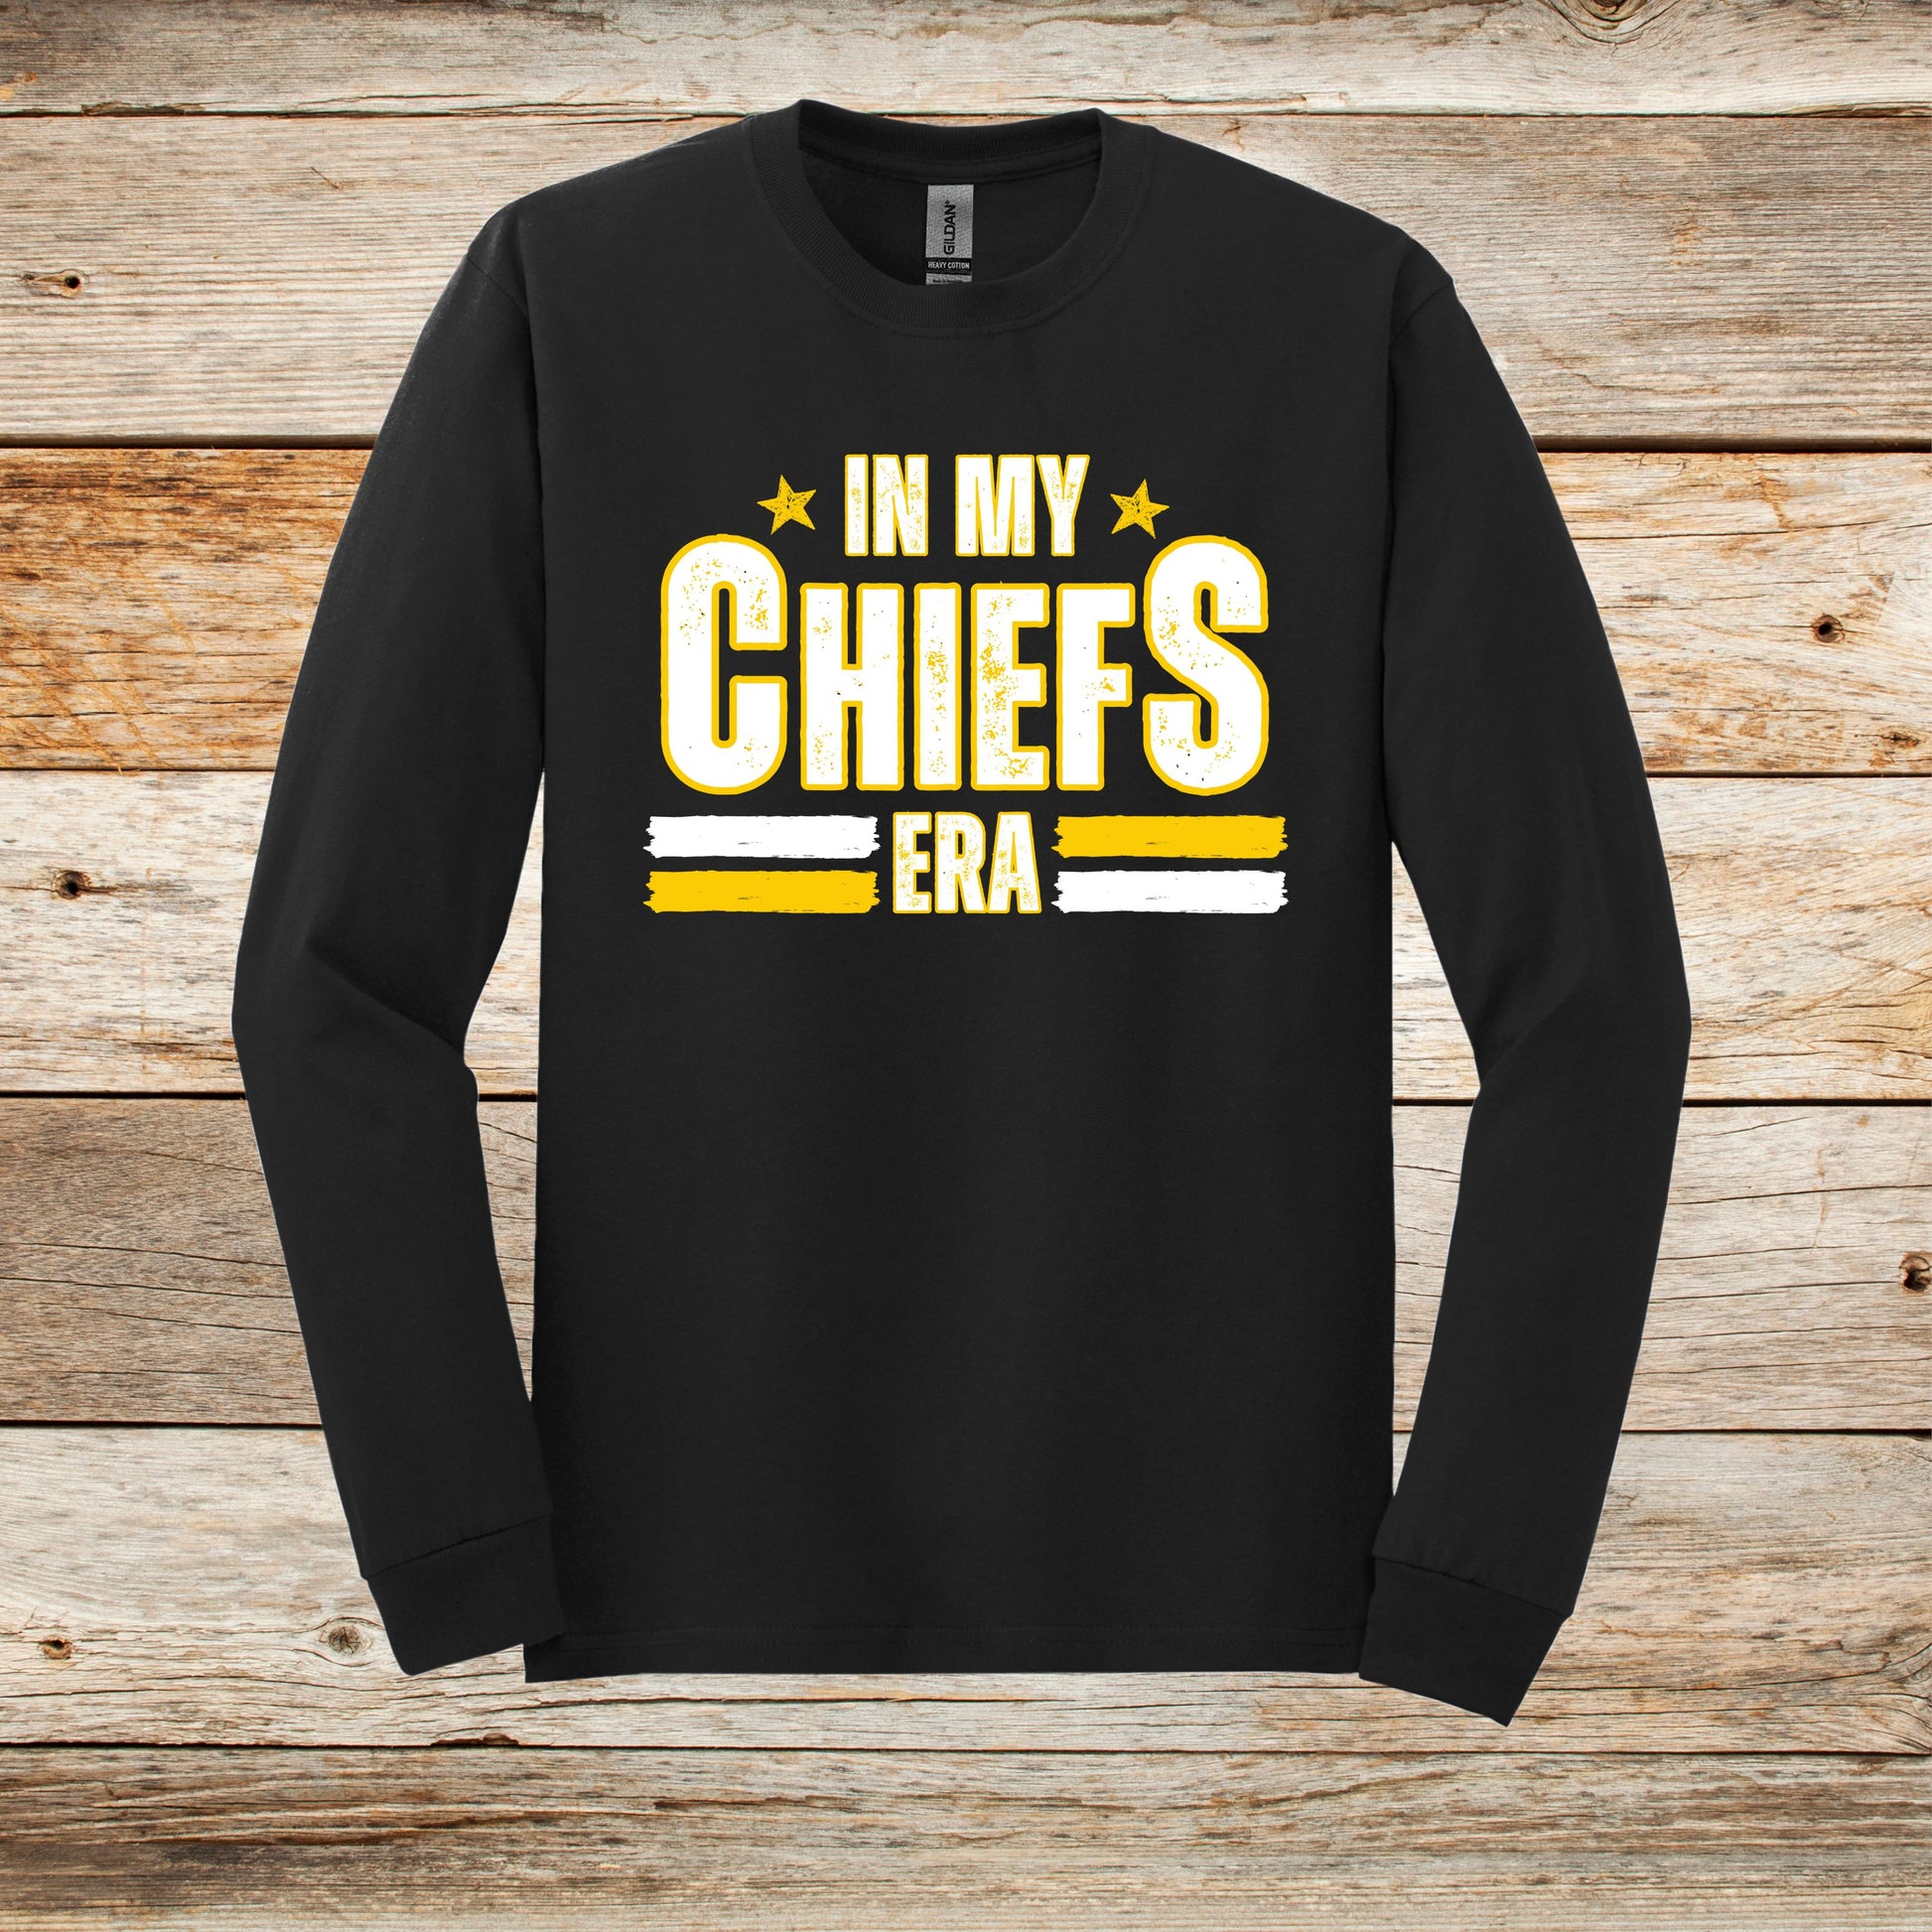 Football Long Sleeve T-Shirt - Chiefs Football - In My Chiefs Era- Adult and Children's Tee Shirts - Sports Long Sleeve T-Shirts Graphic Avenue Black Adult Small 